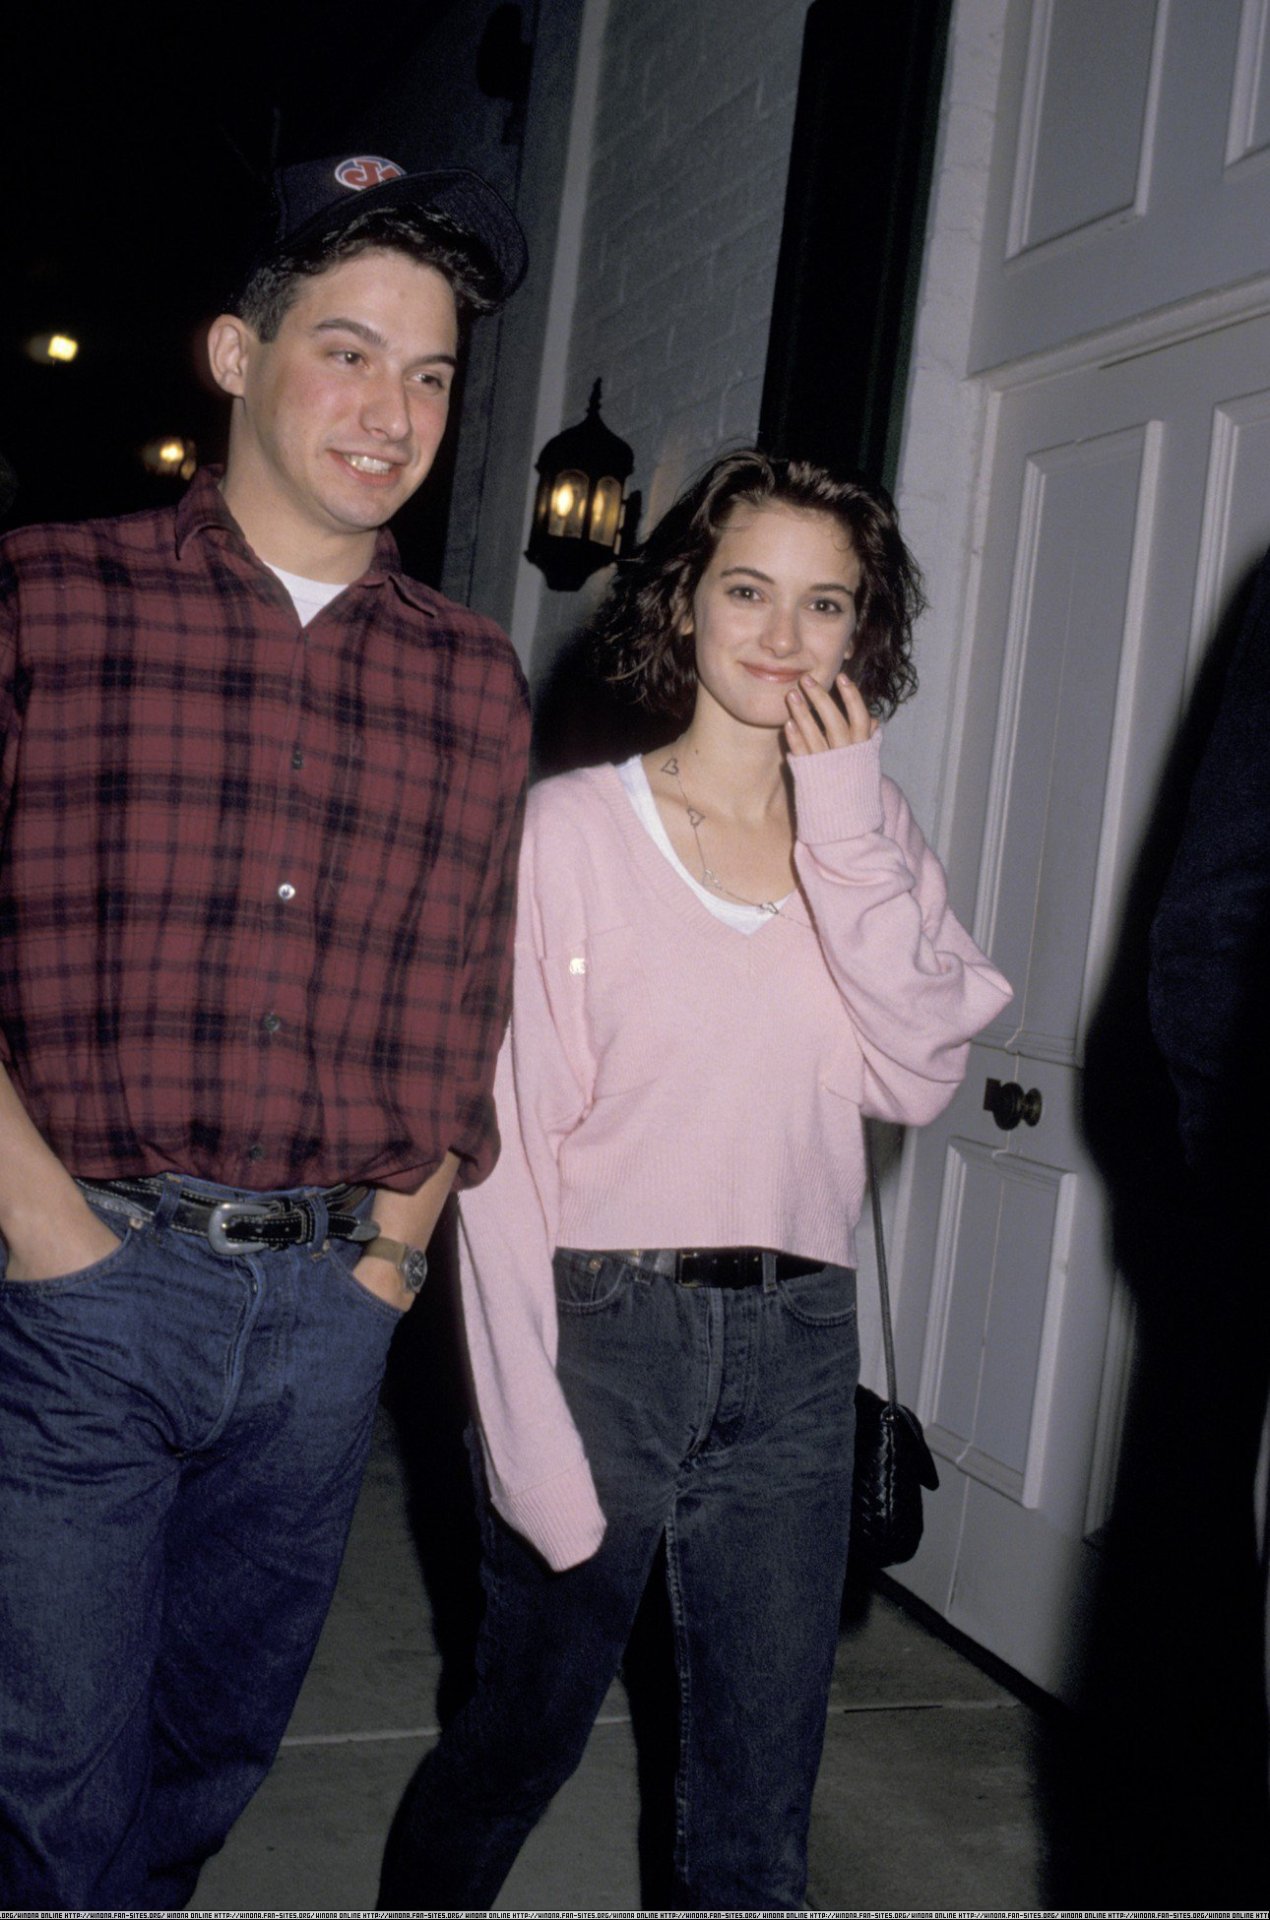 Winona Ryder and Ad-Rock from the Beastie Boys, 1989